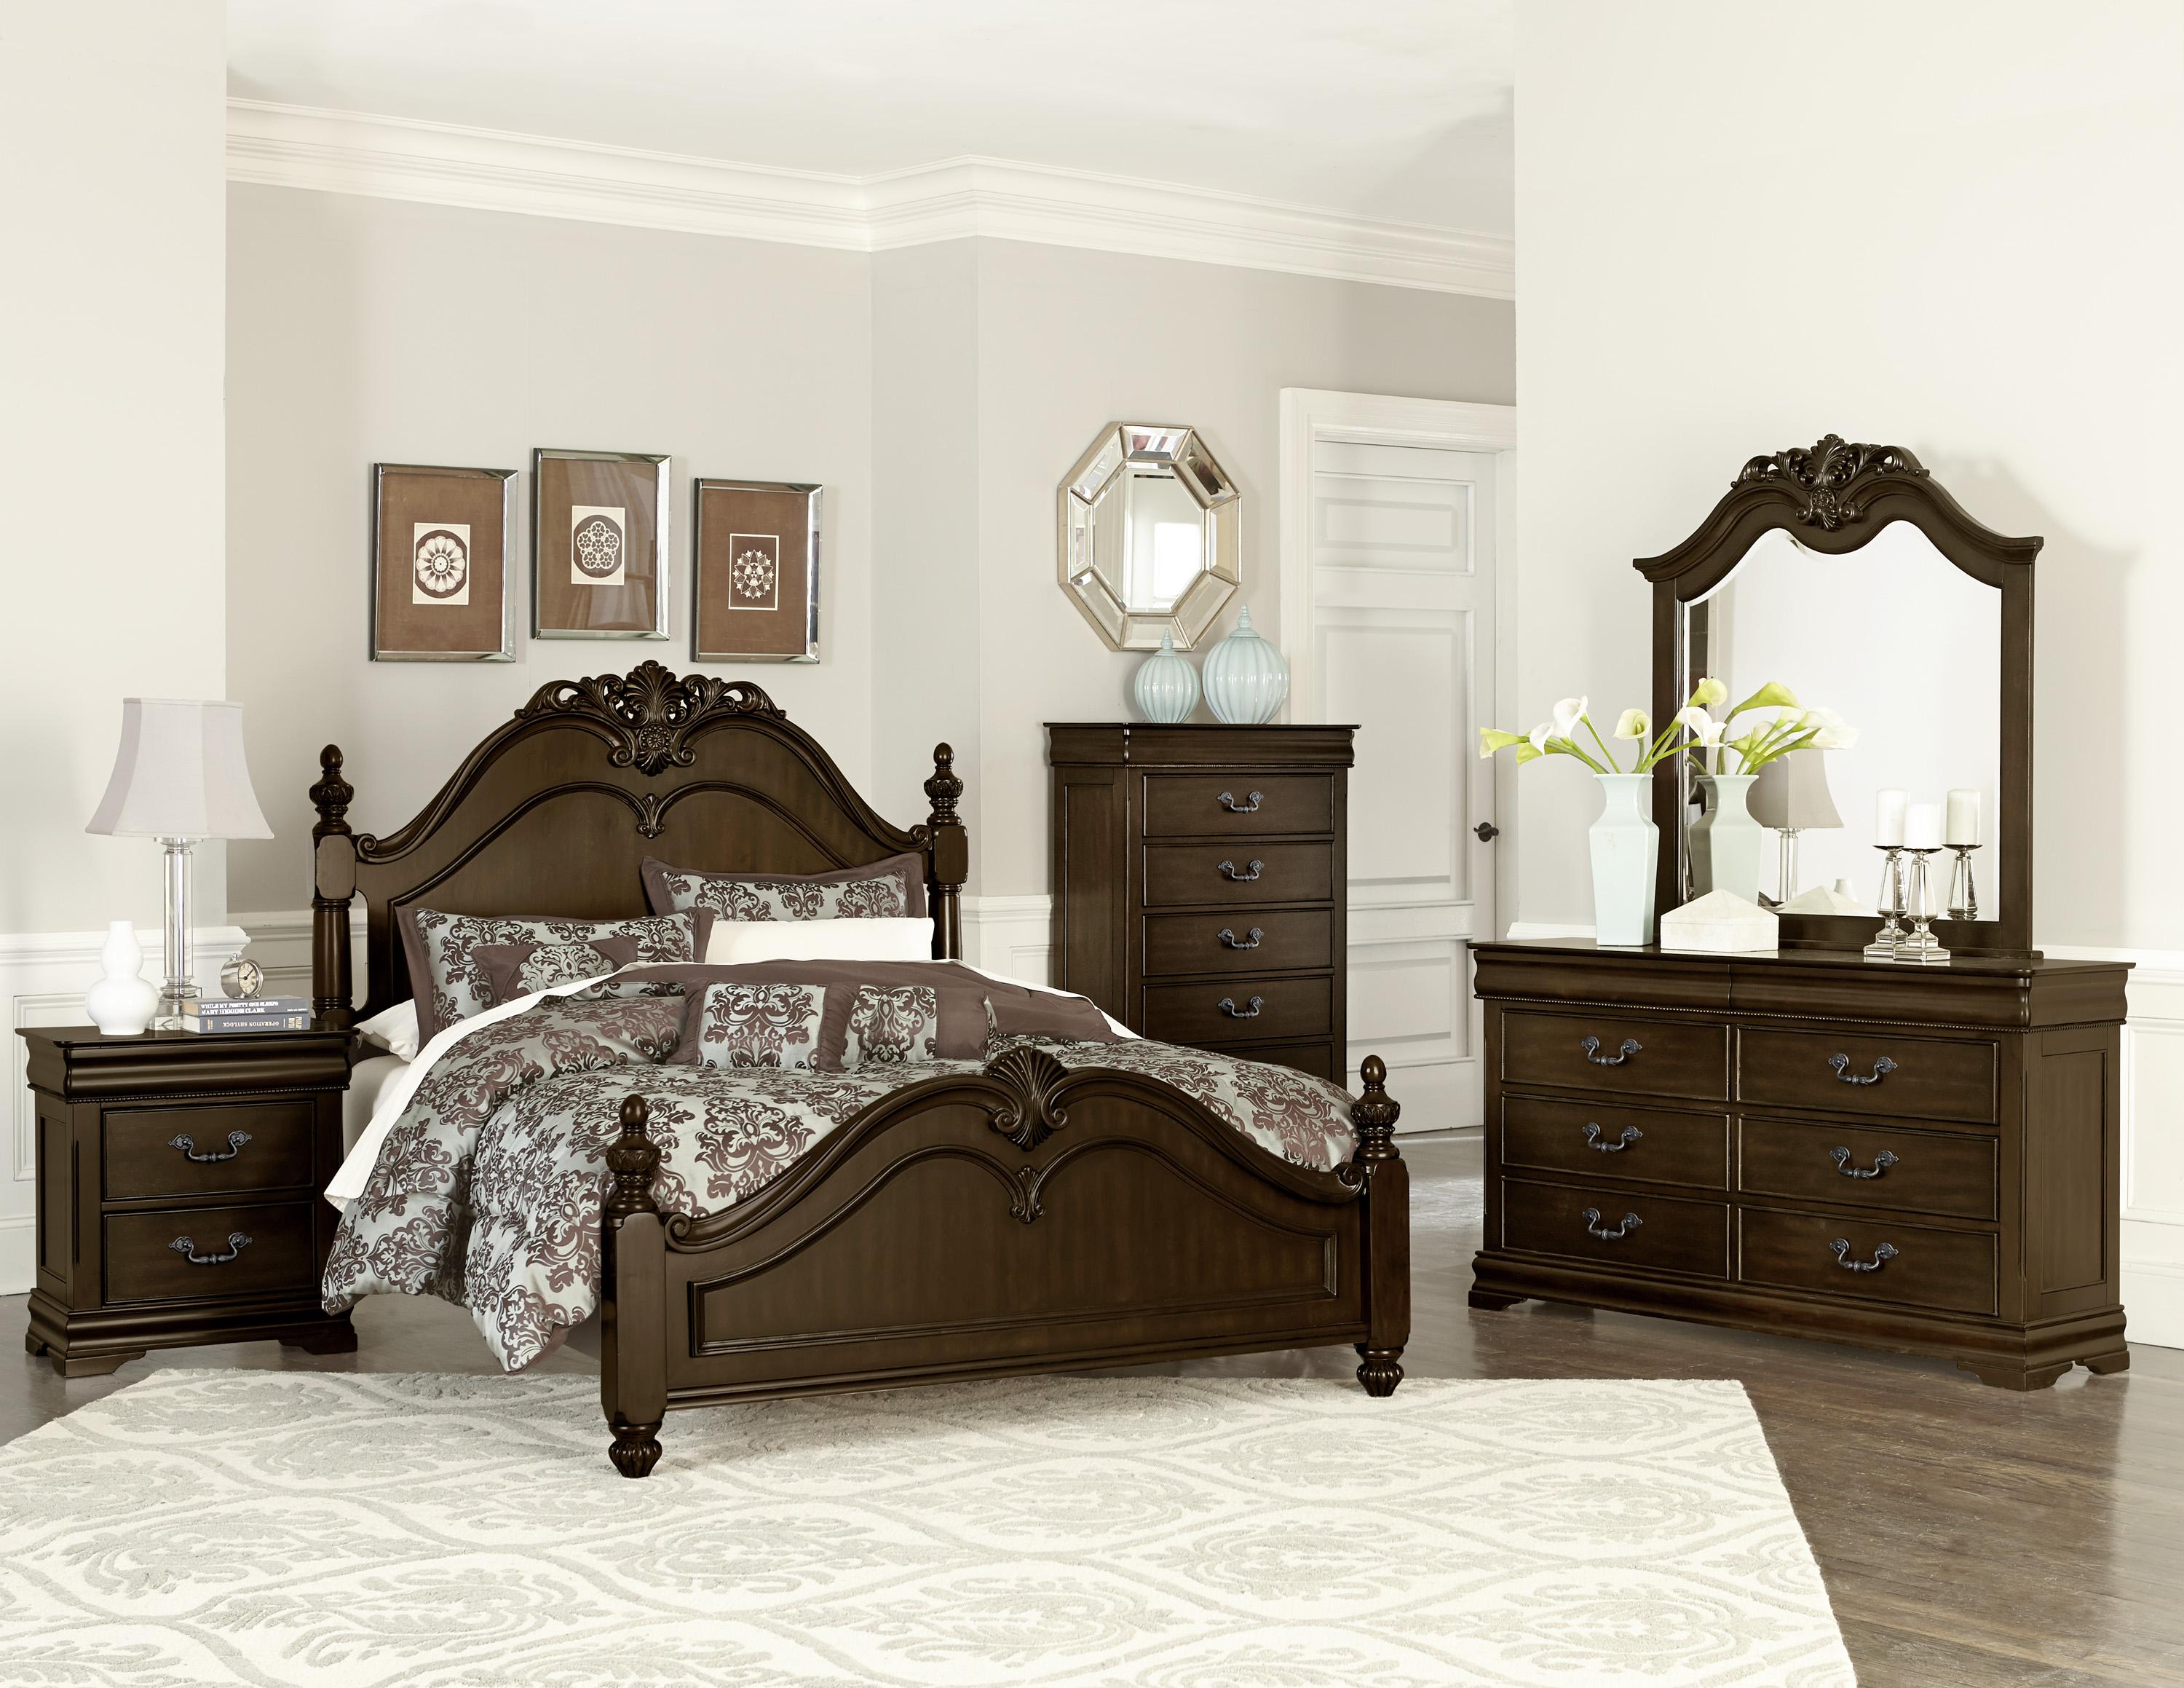 8.H Acme Louis Philippe lll 2pc Panel Bedroom Set in Real White by